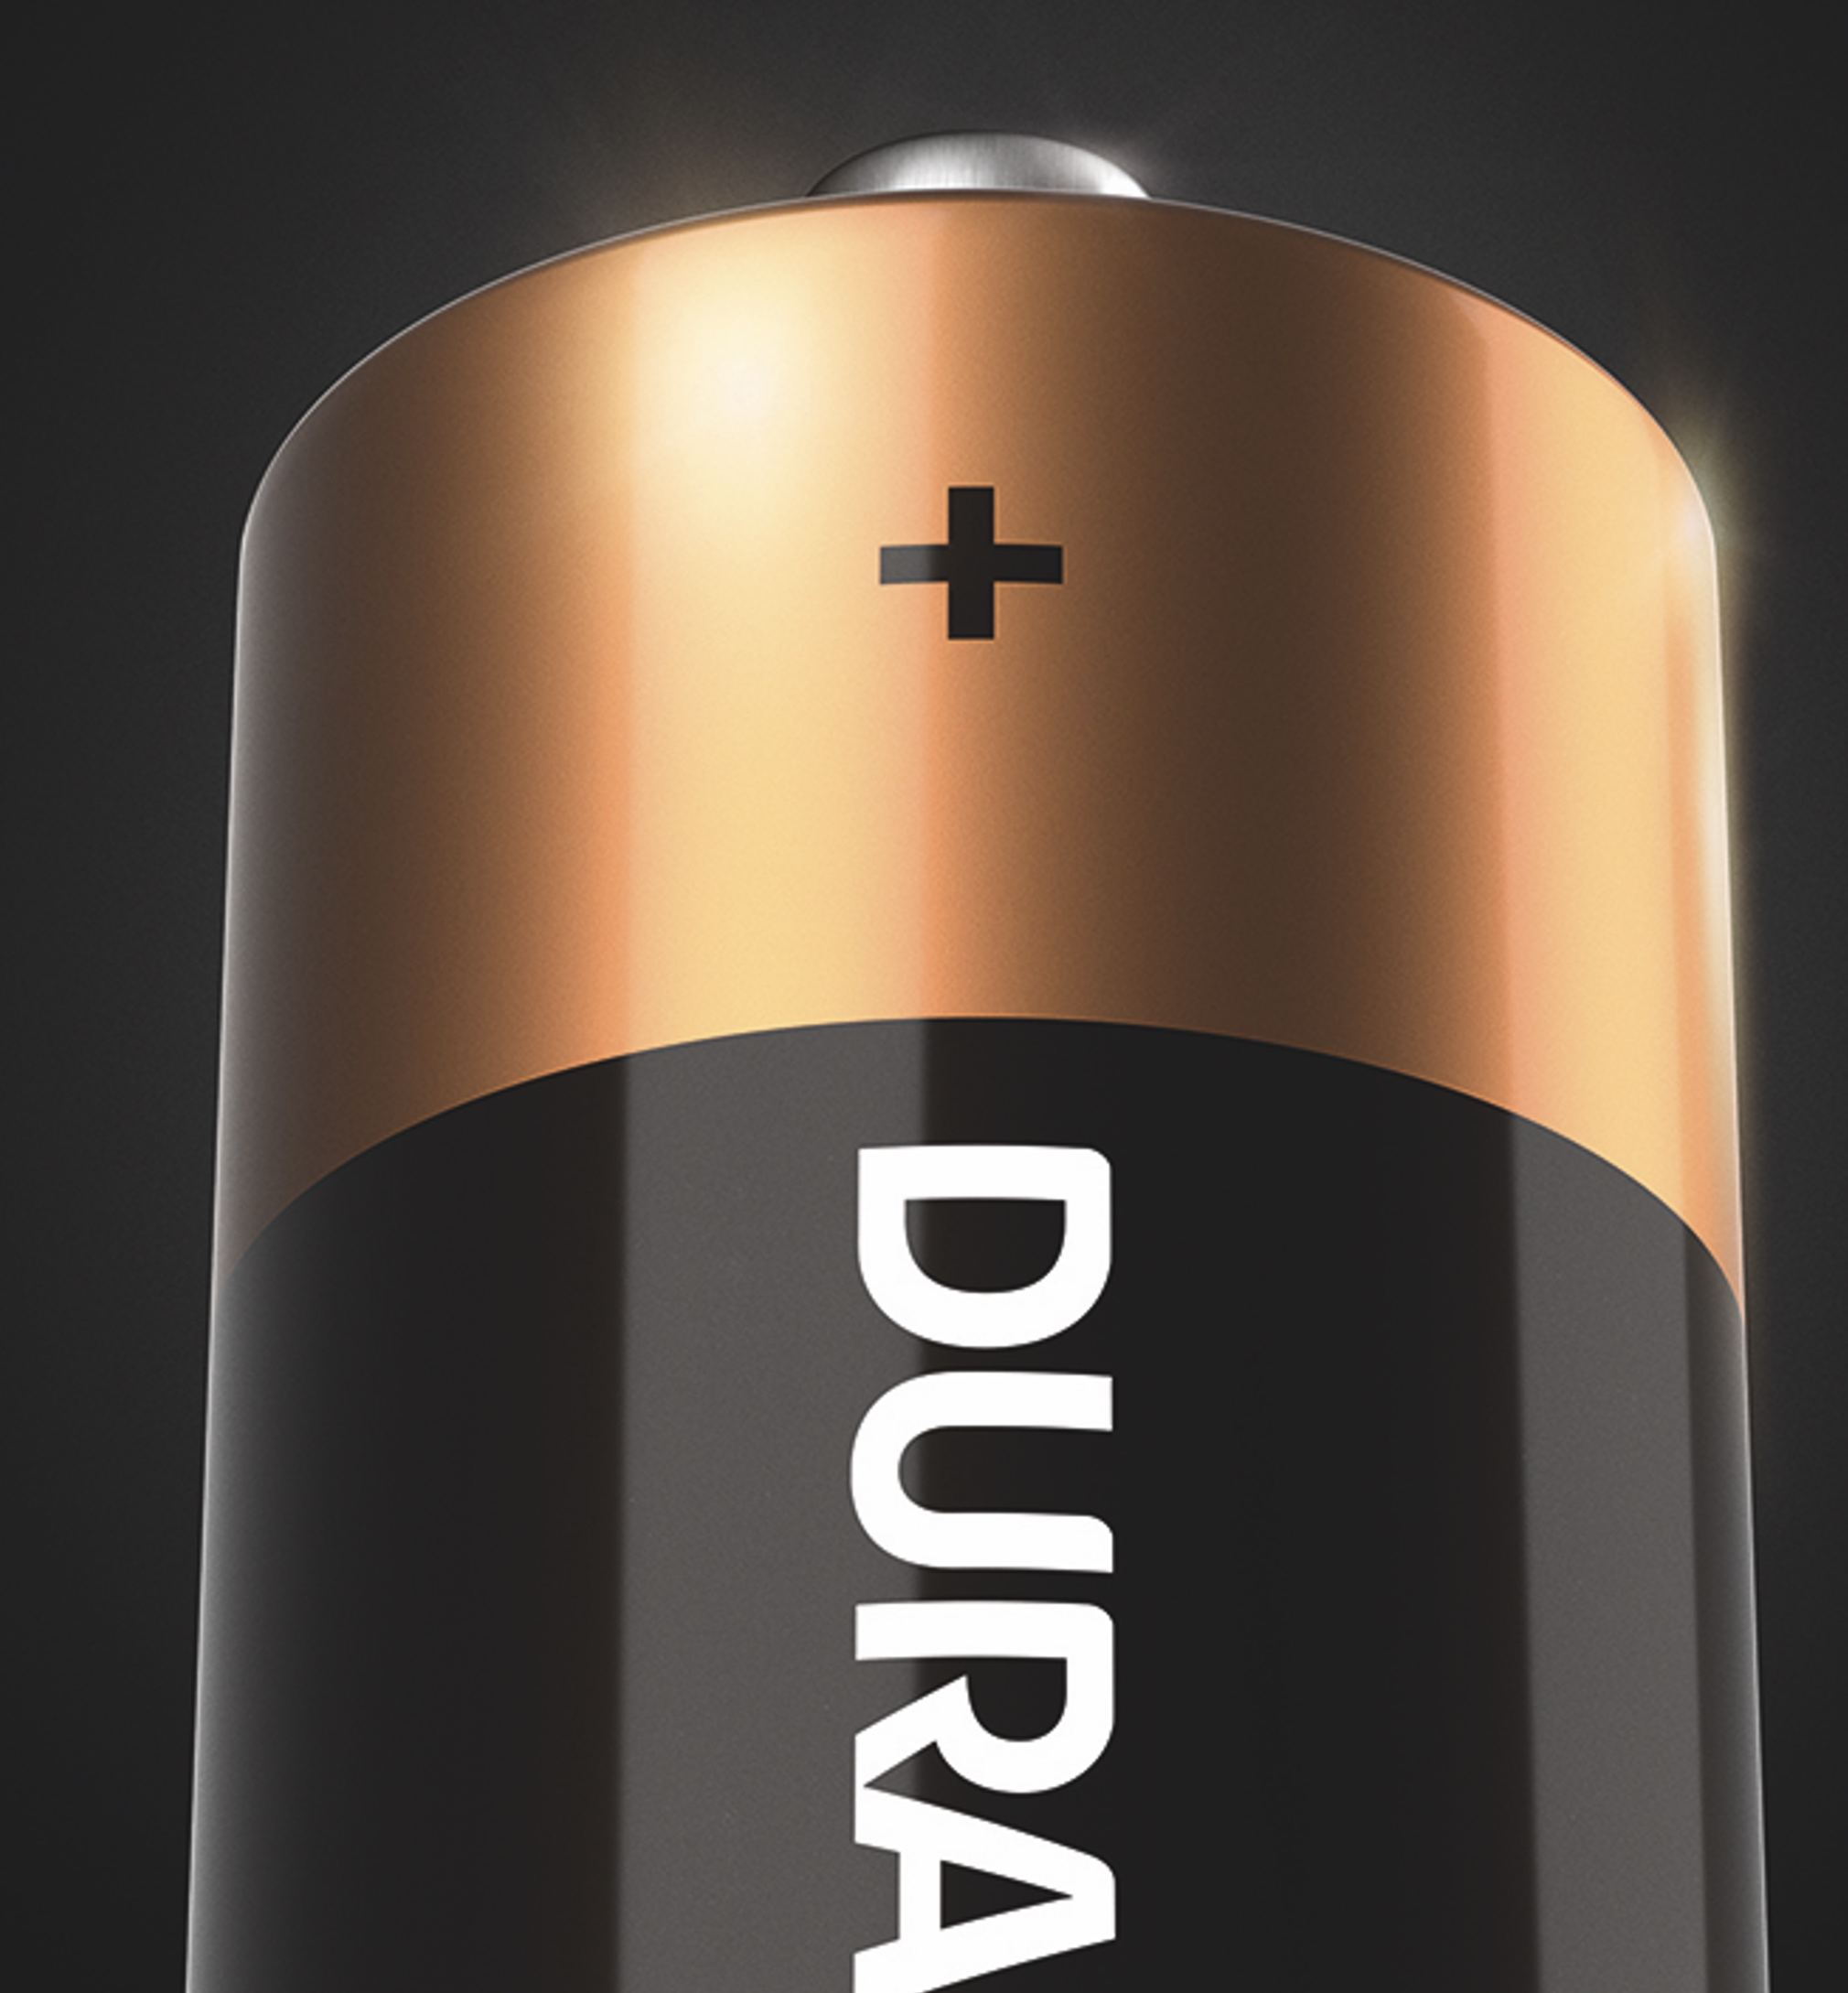 Duracell's CMO on the 7Ps that are redefining the brand